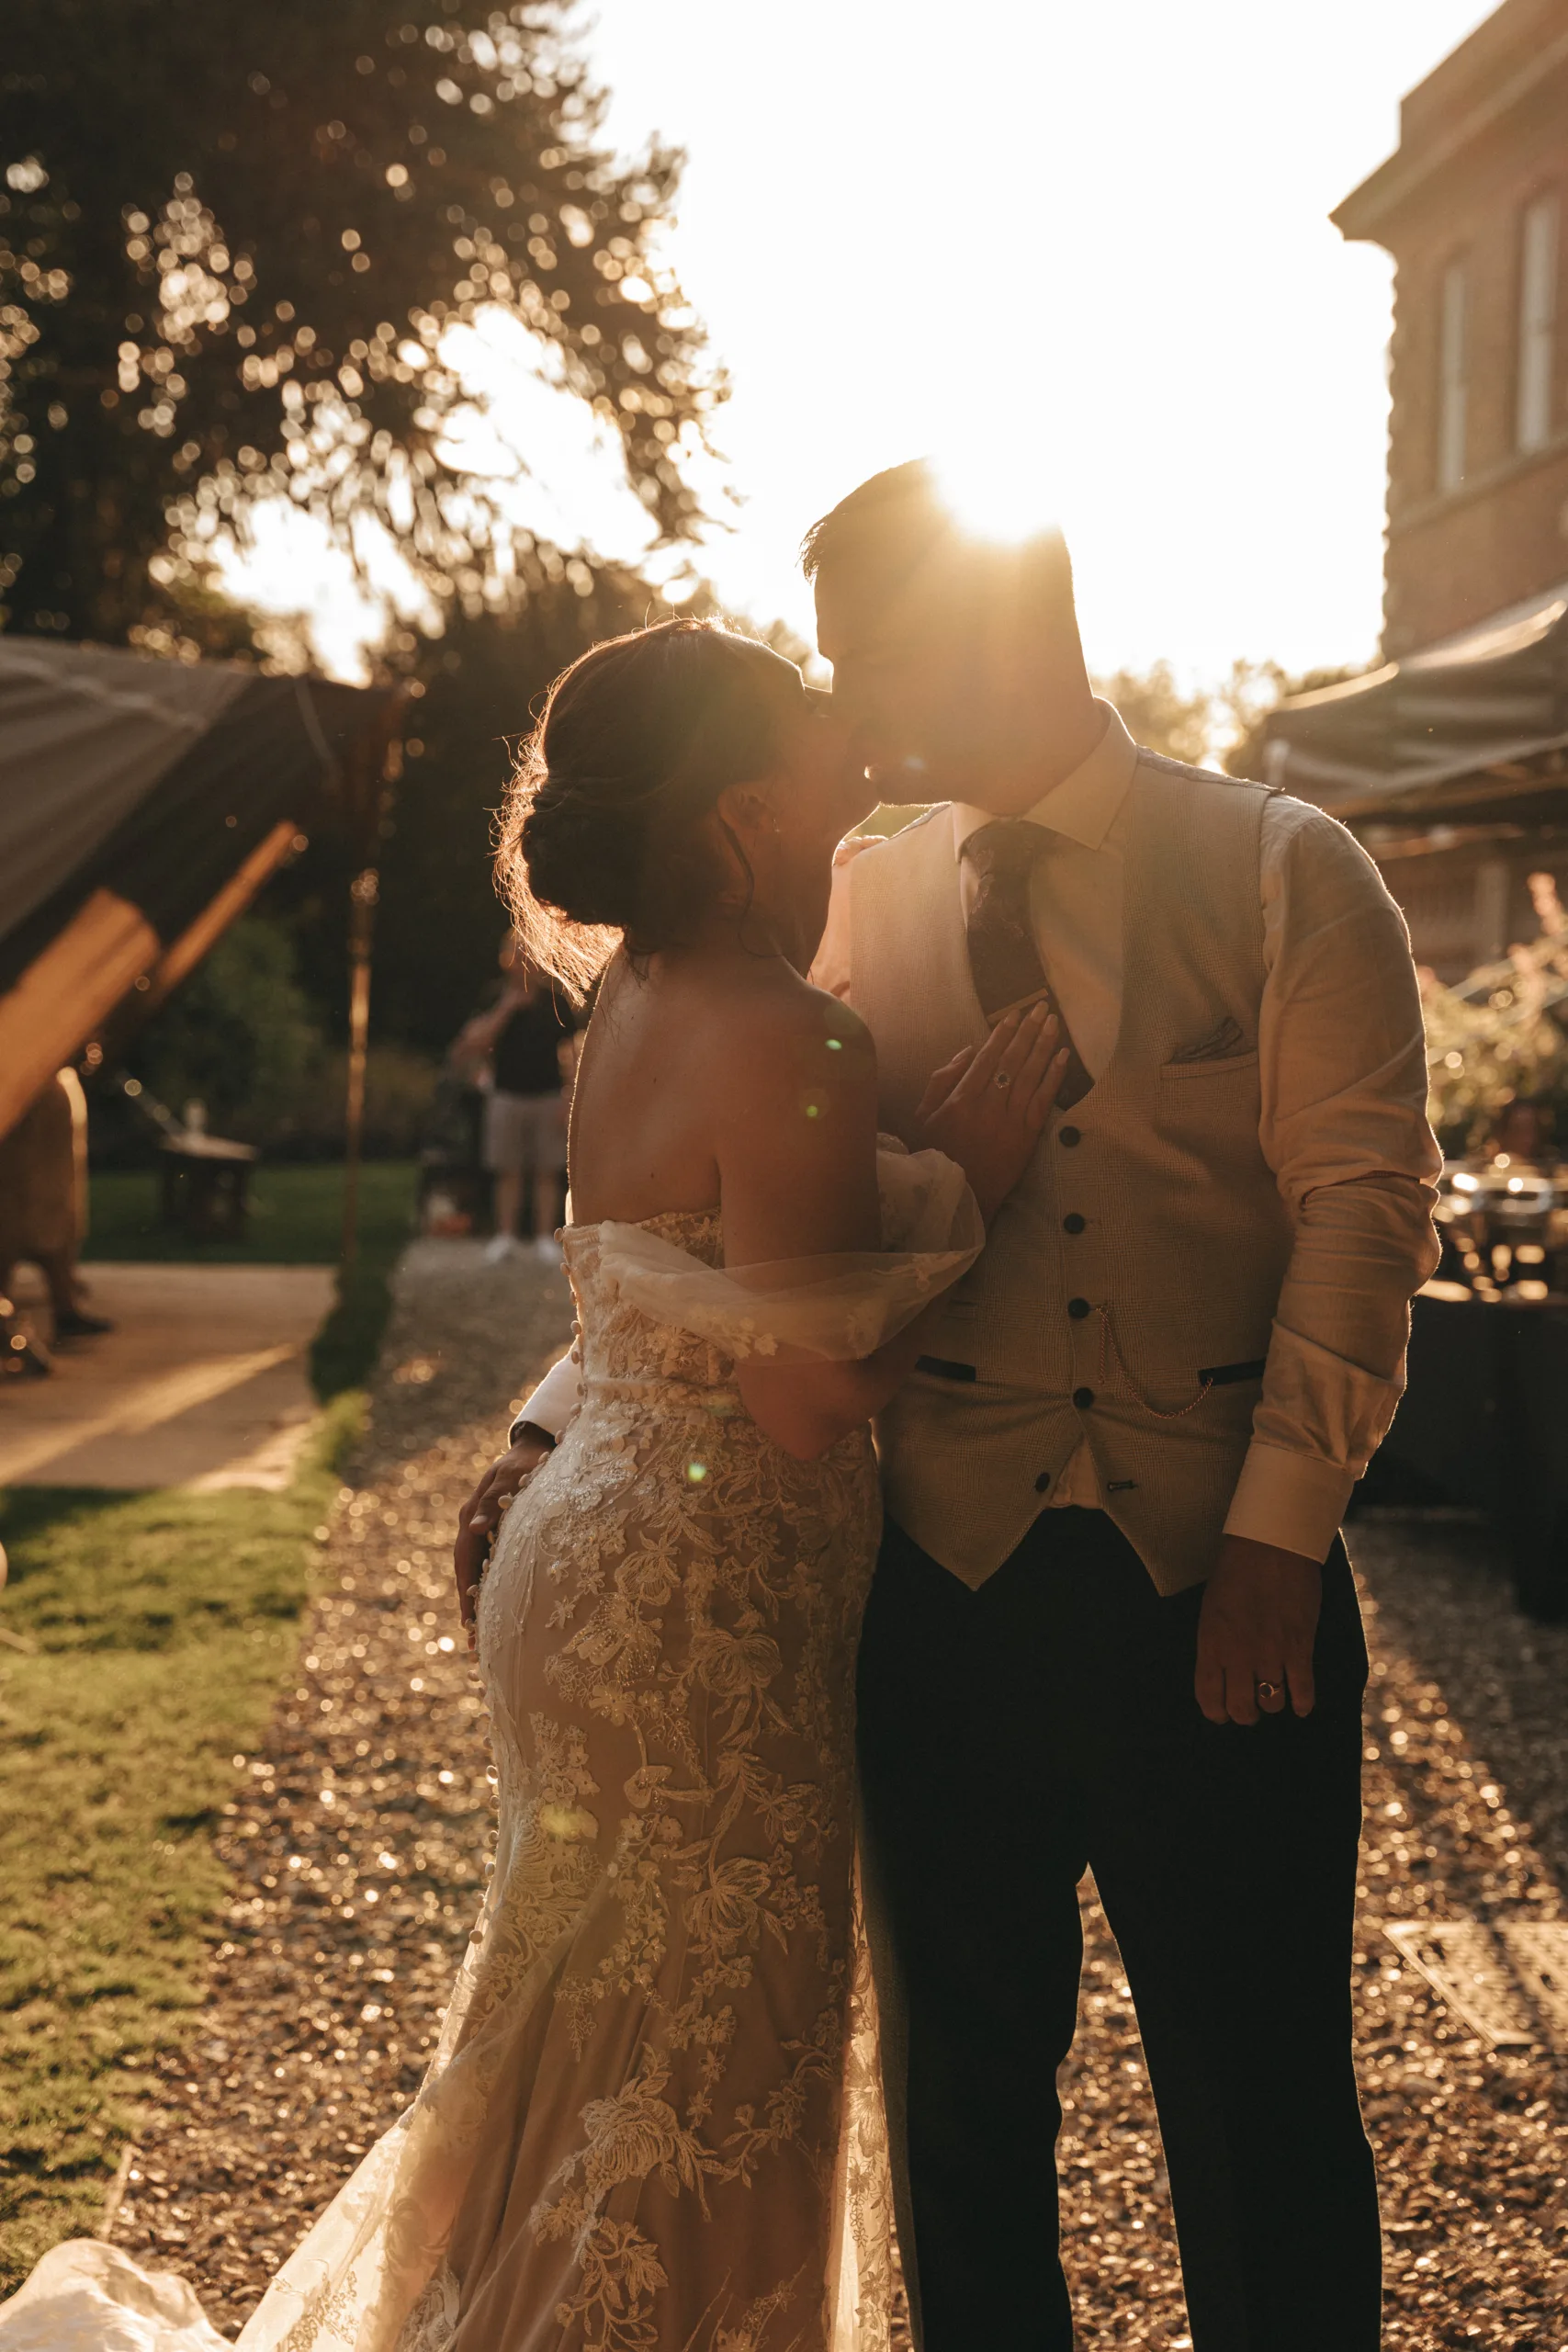 A bride and groom kiss in front of a tent at sunset while a photographer captures the moment.